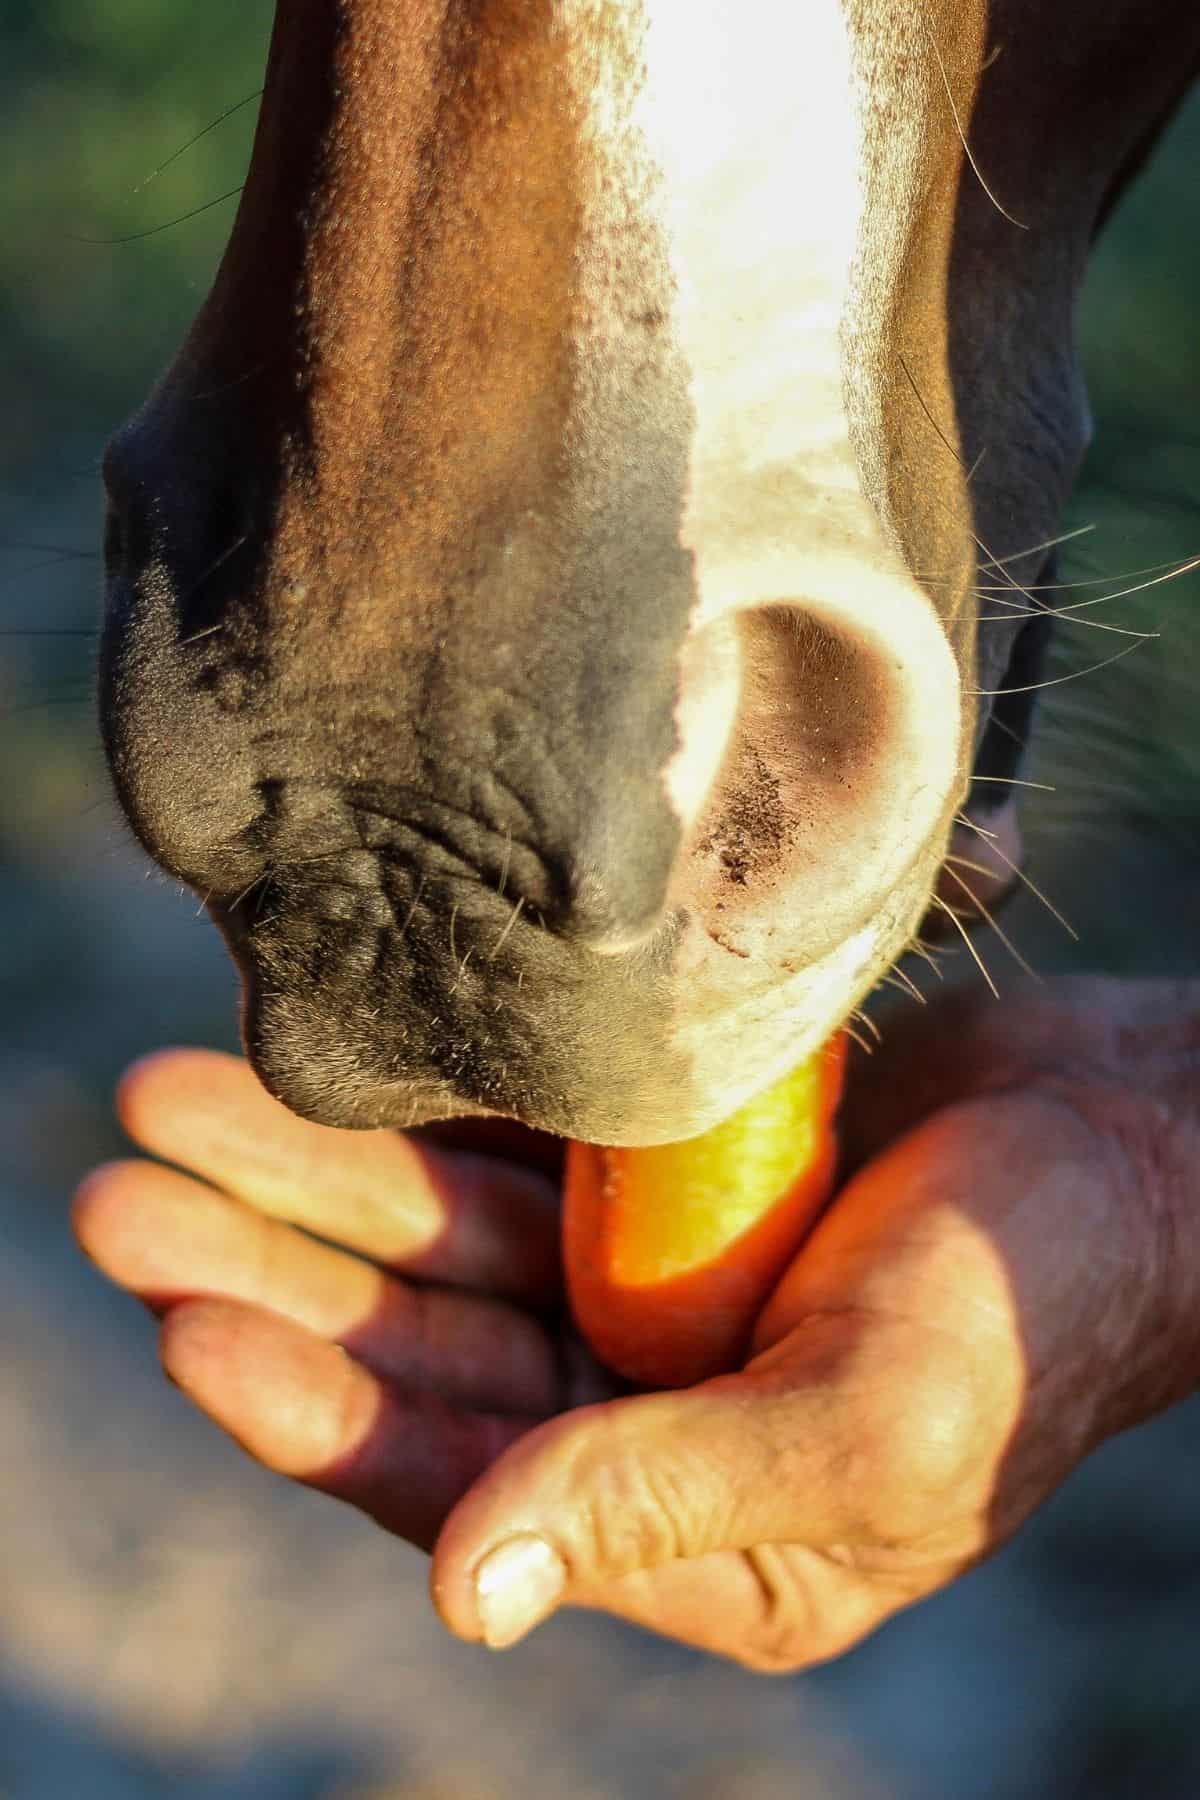 Hand holding carrot to horse mouth